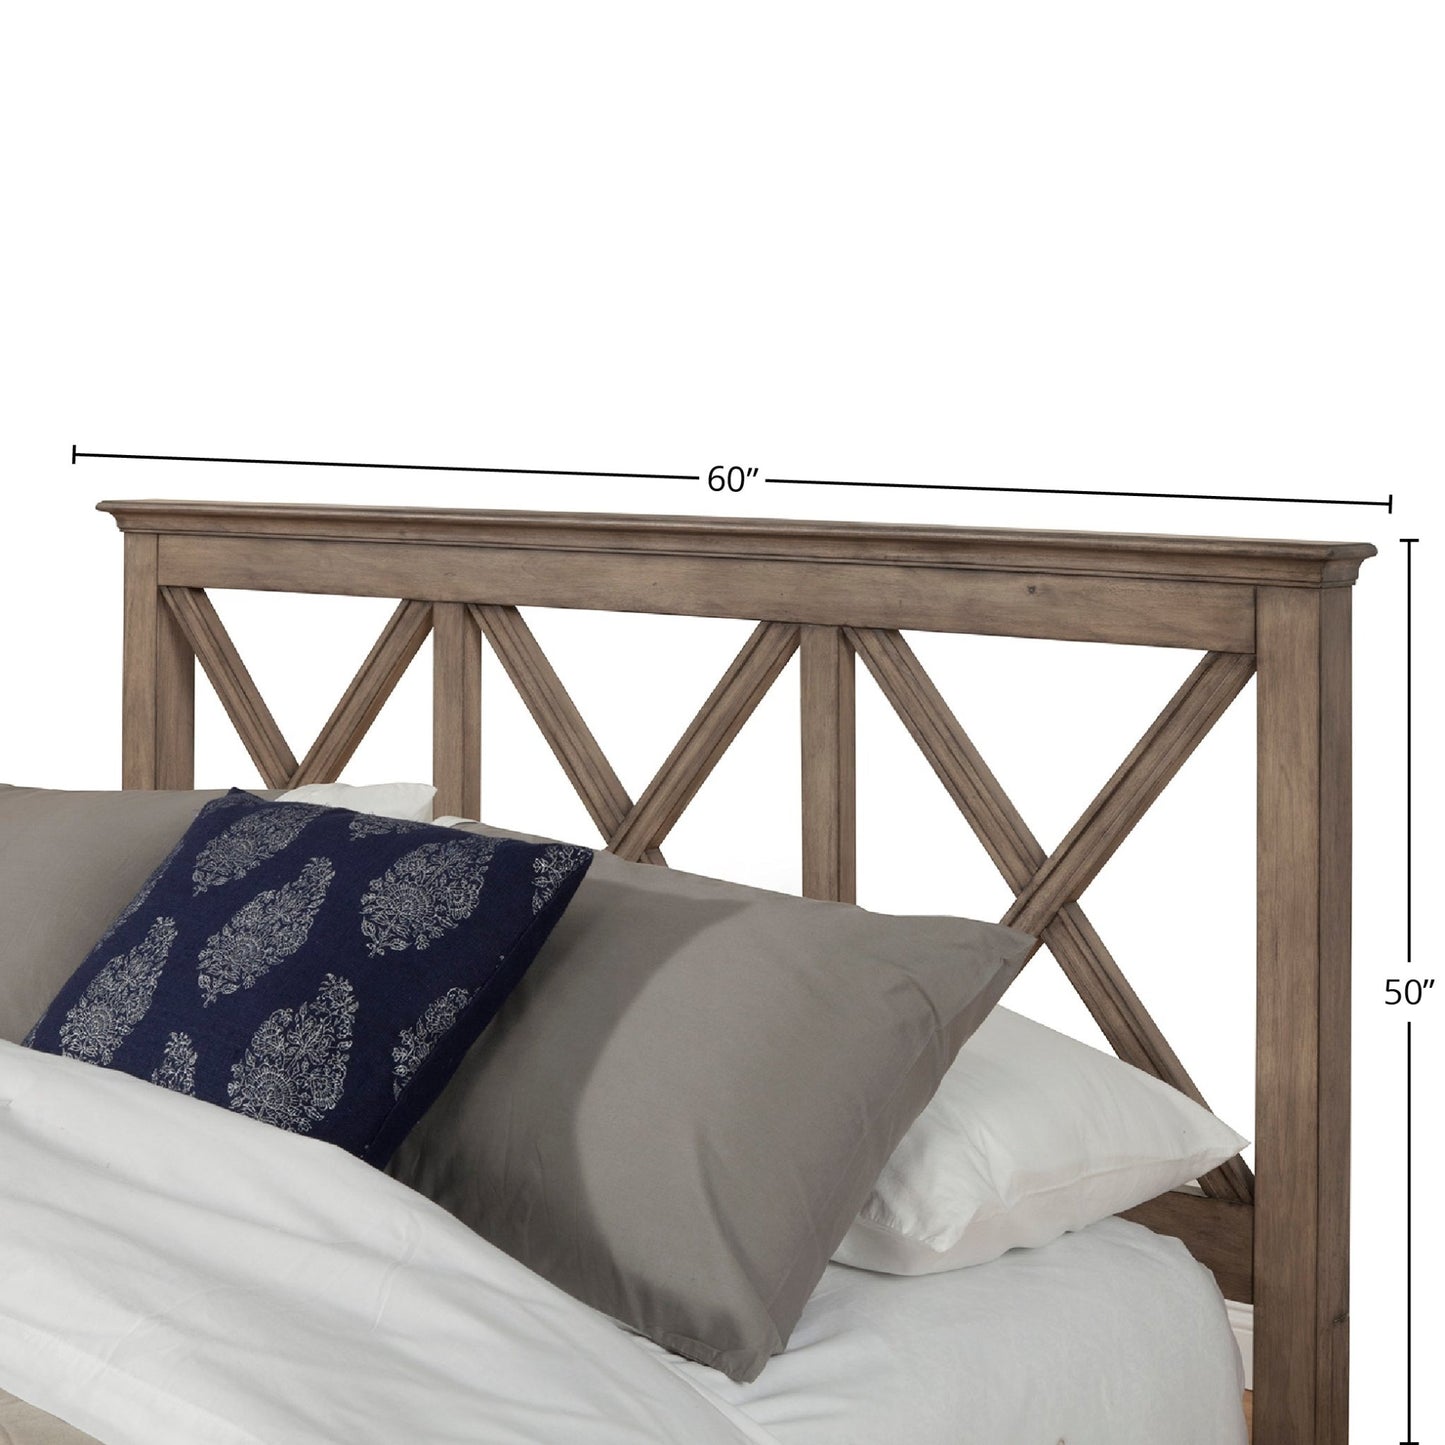 Potter Headboard Only, French Truffle - Alpine Furniture